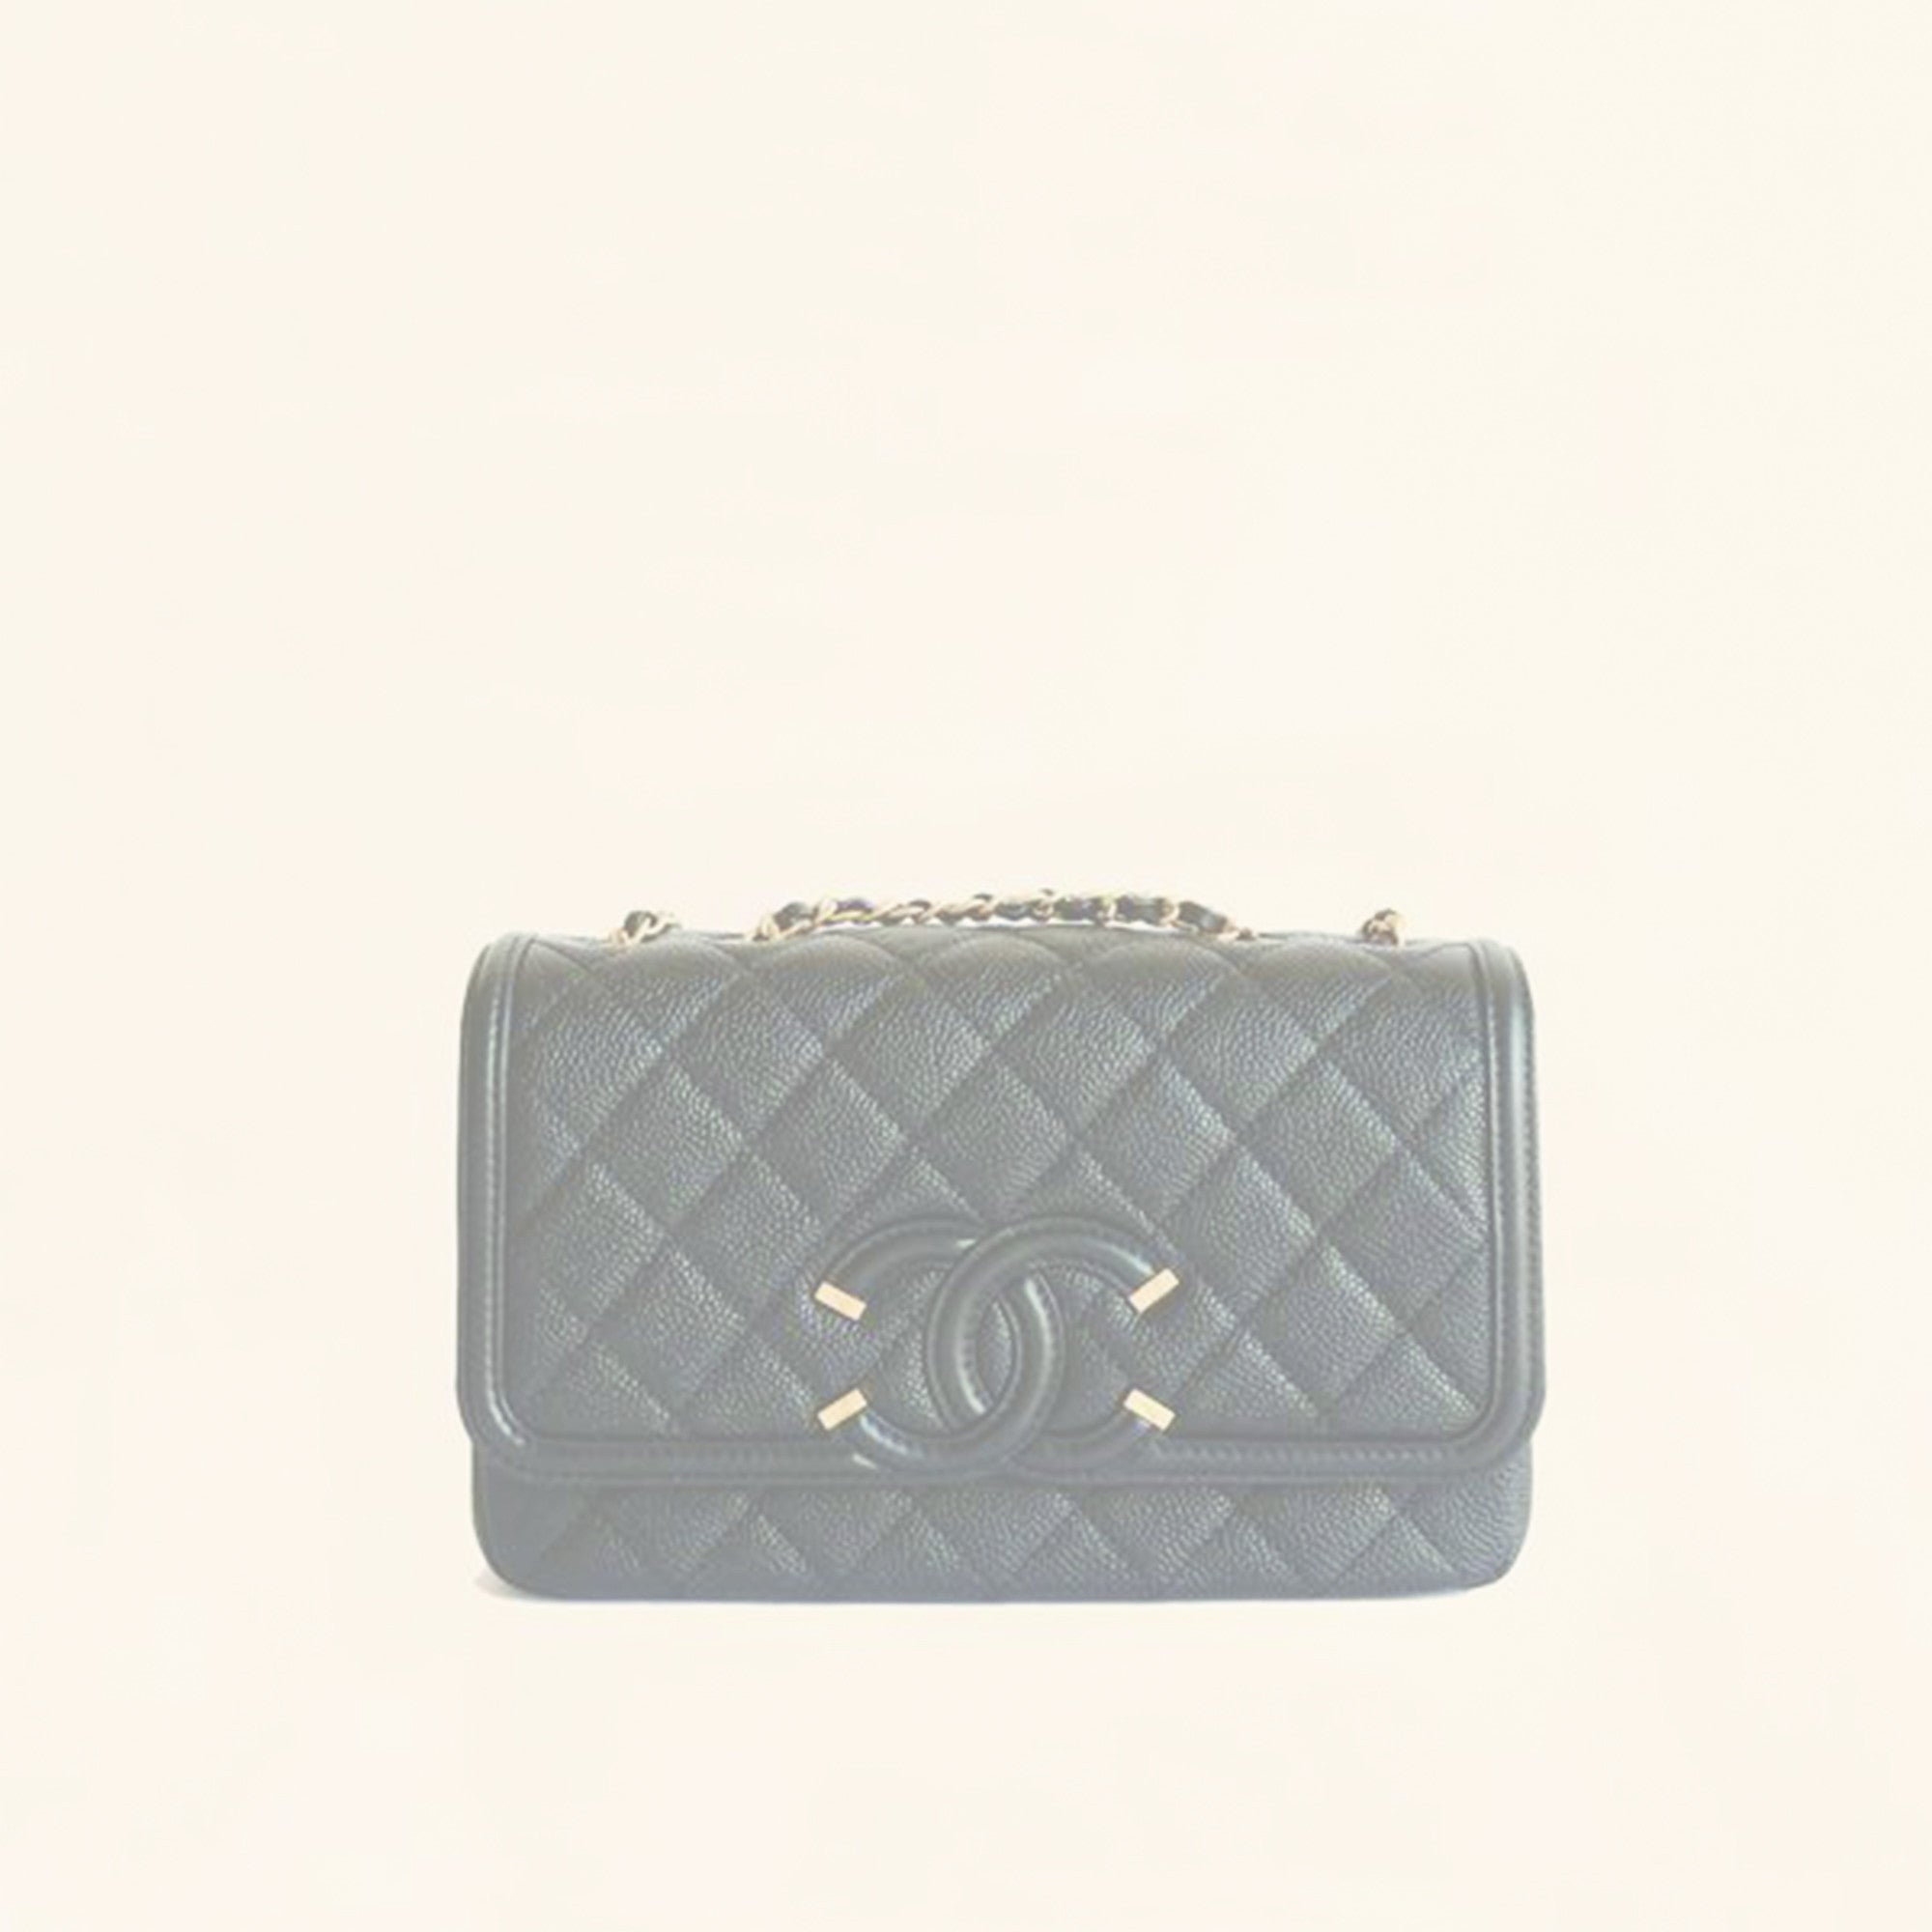 chanel handbag black quilted leather